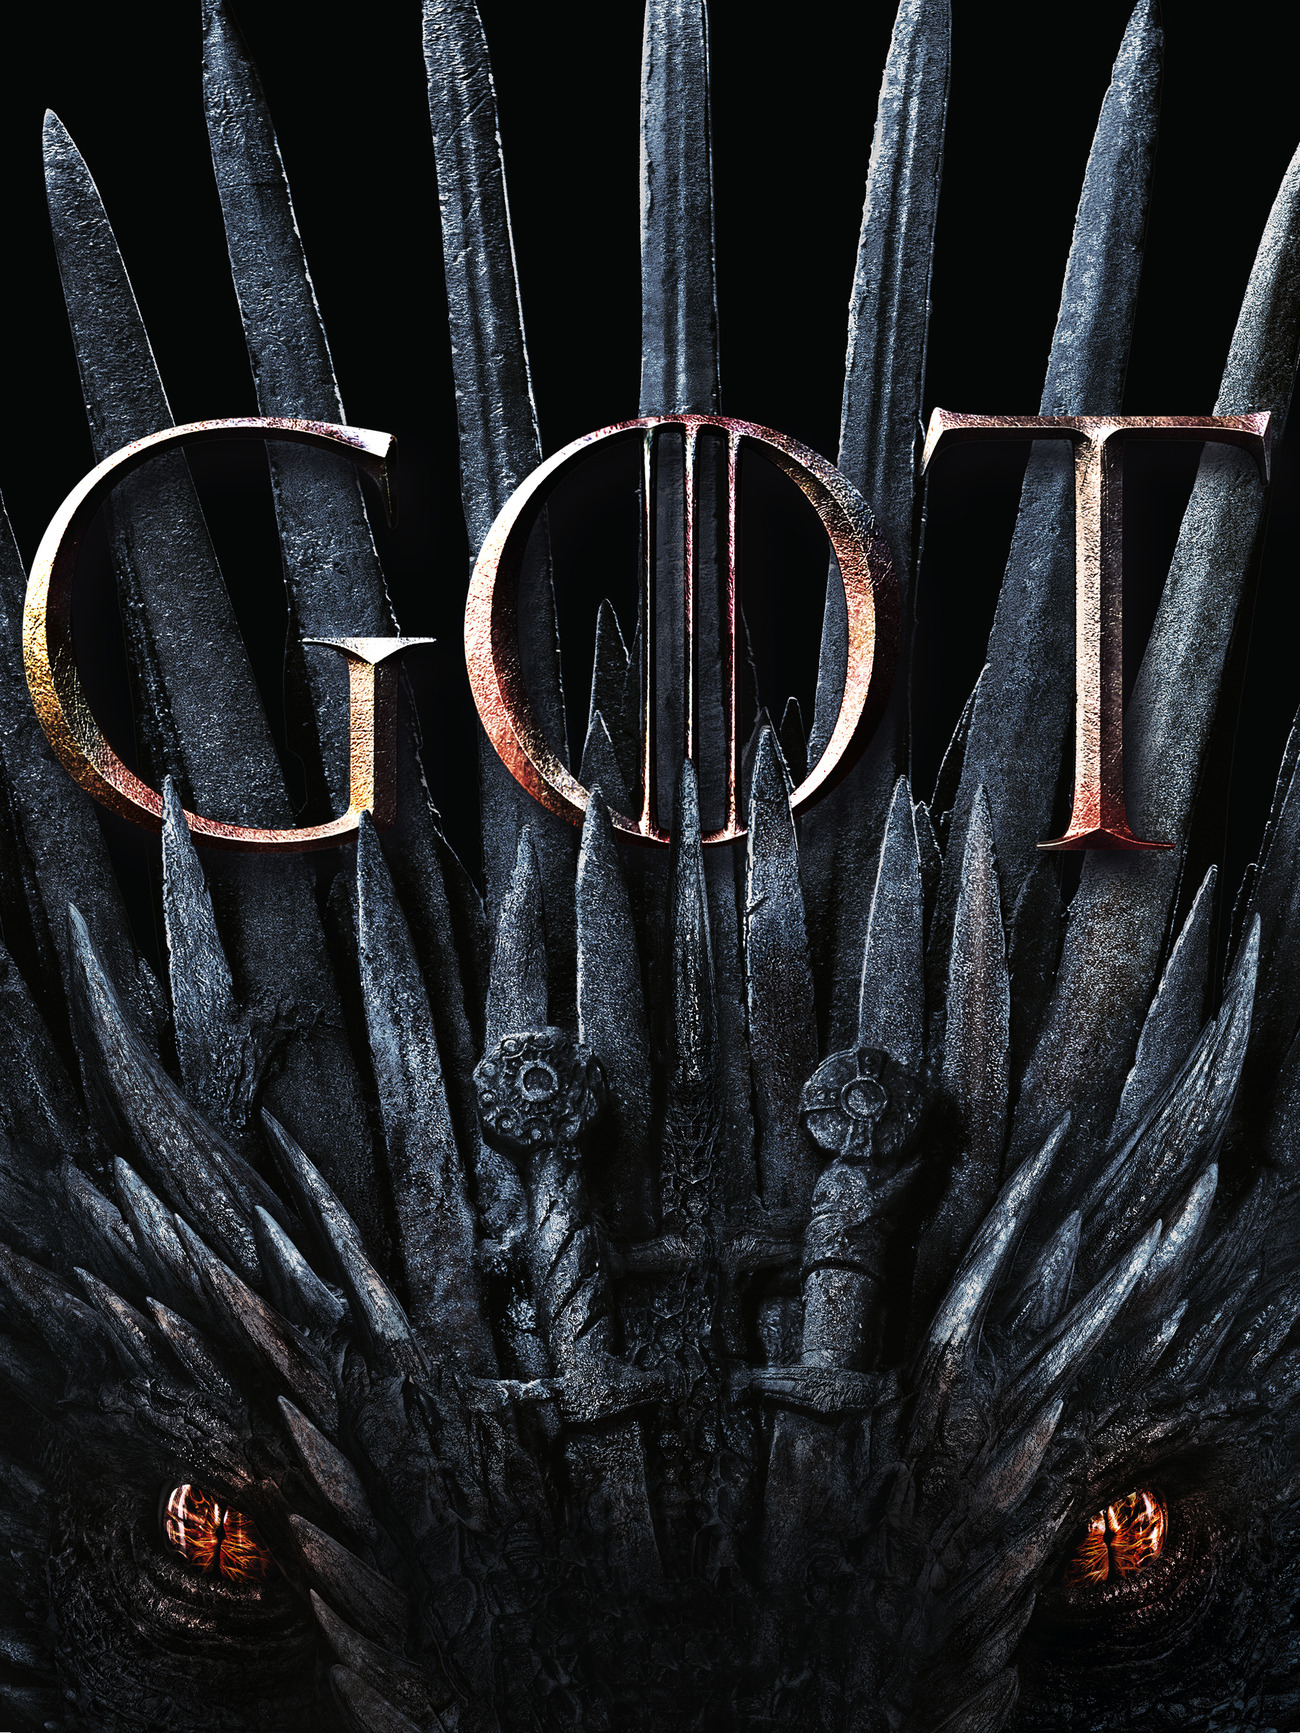 The Game of Thrones Season 8 poster; the swords of the iron throne transitioning into scales with orange dragon's eyes visible at the bottom.